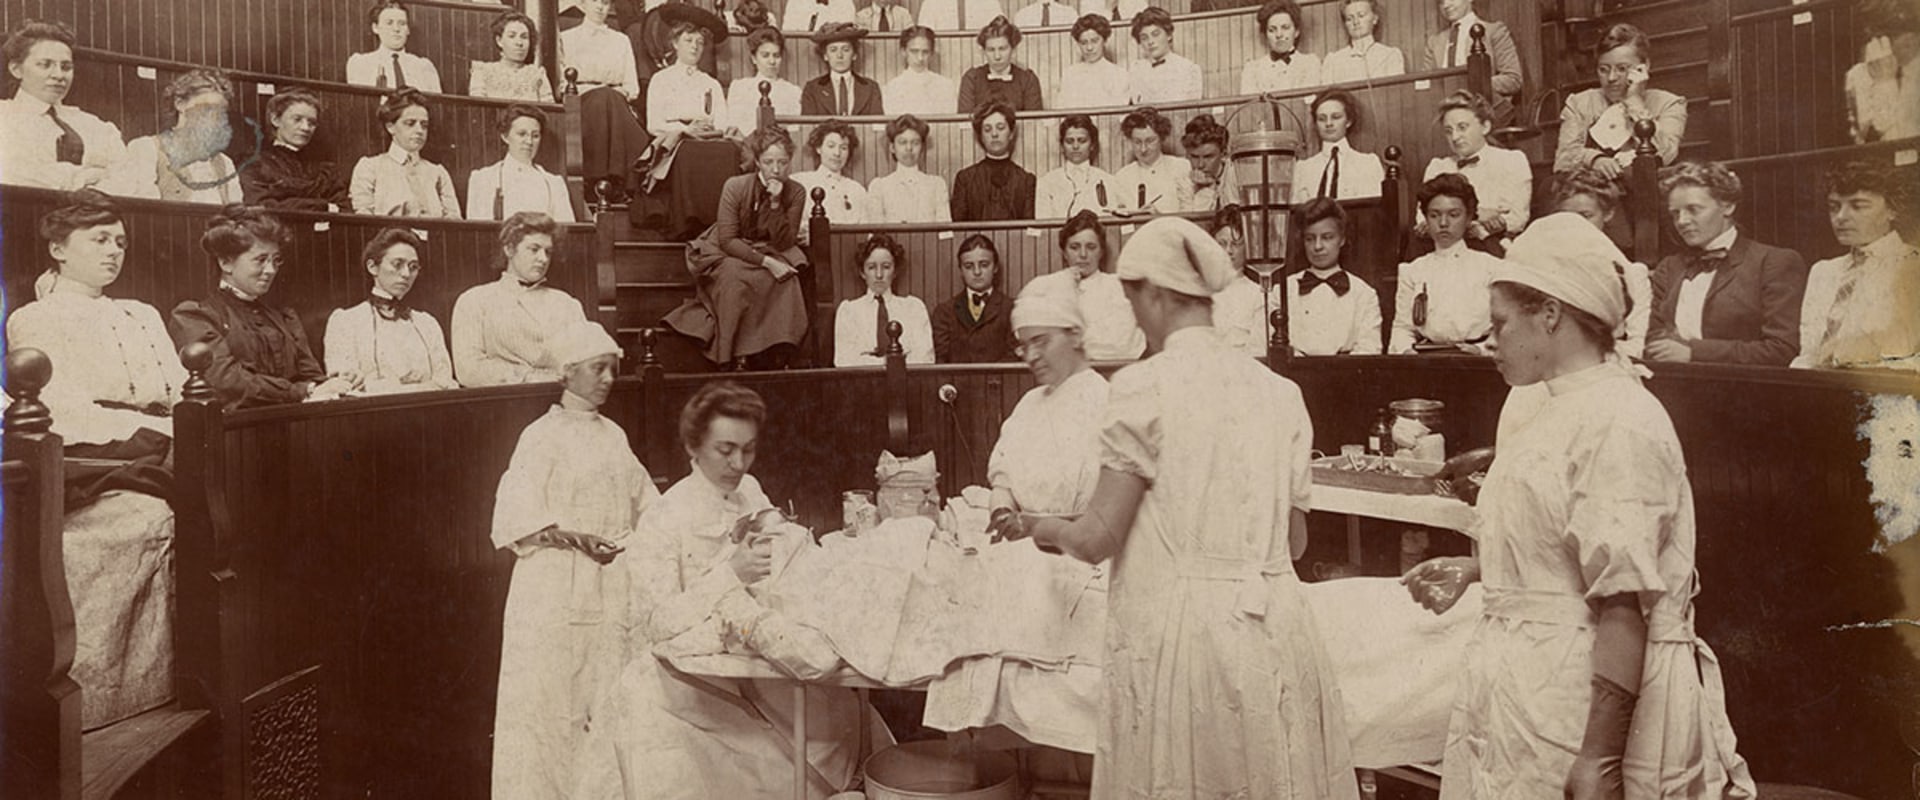 How many black doctors were there in 1900?